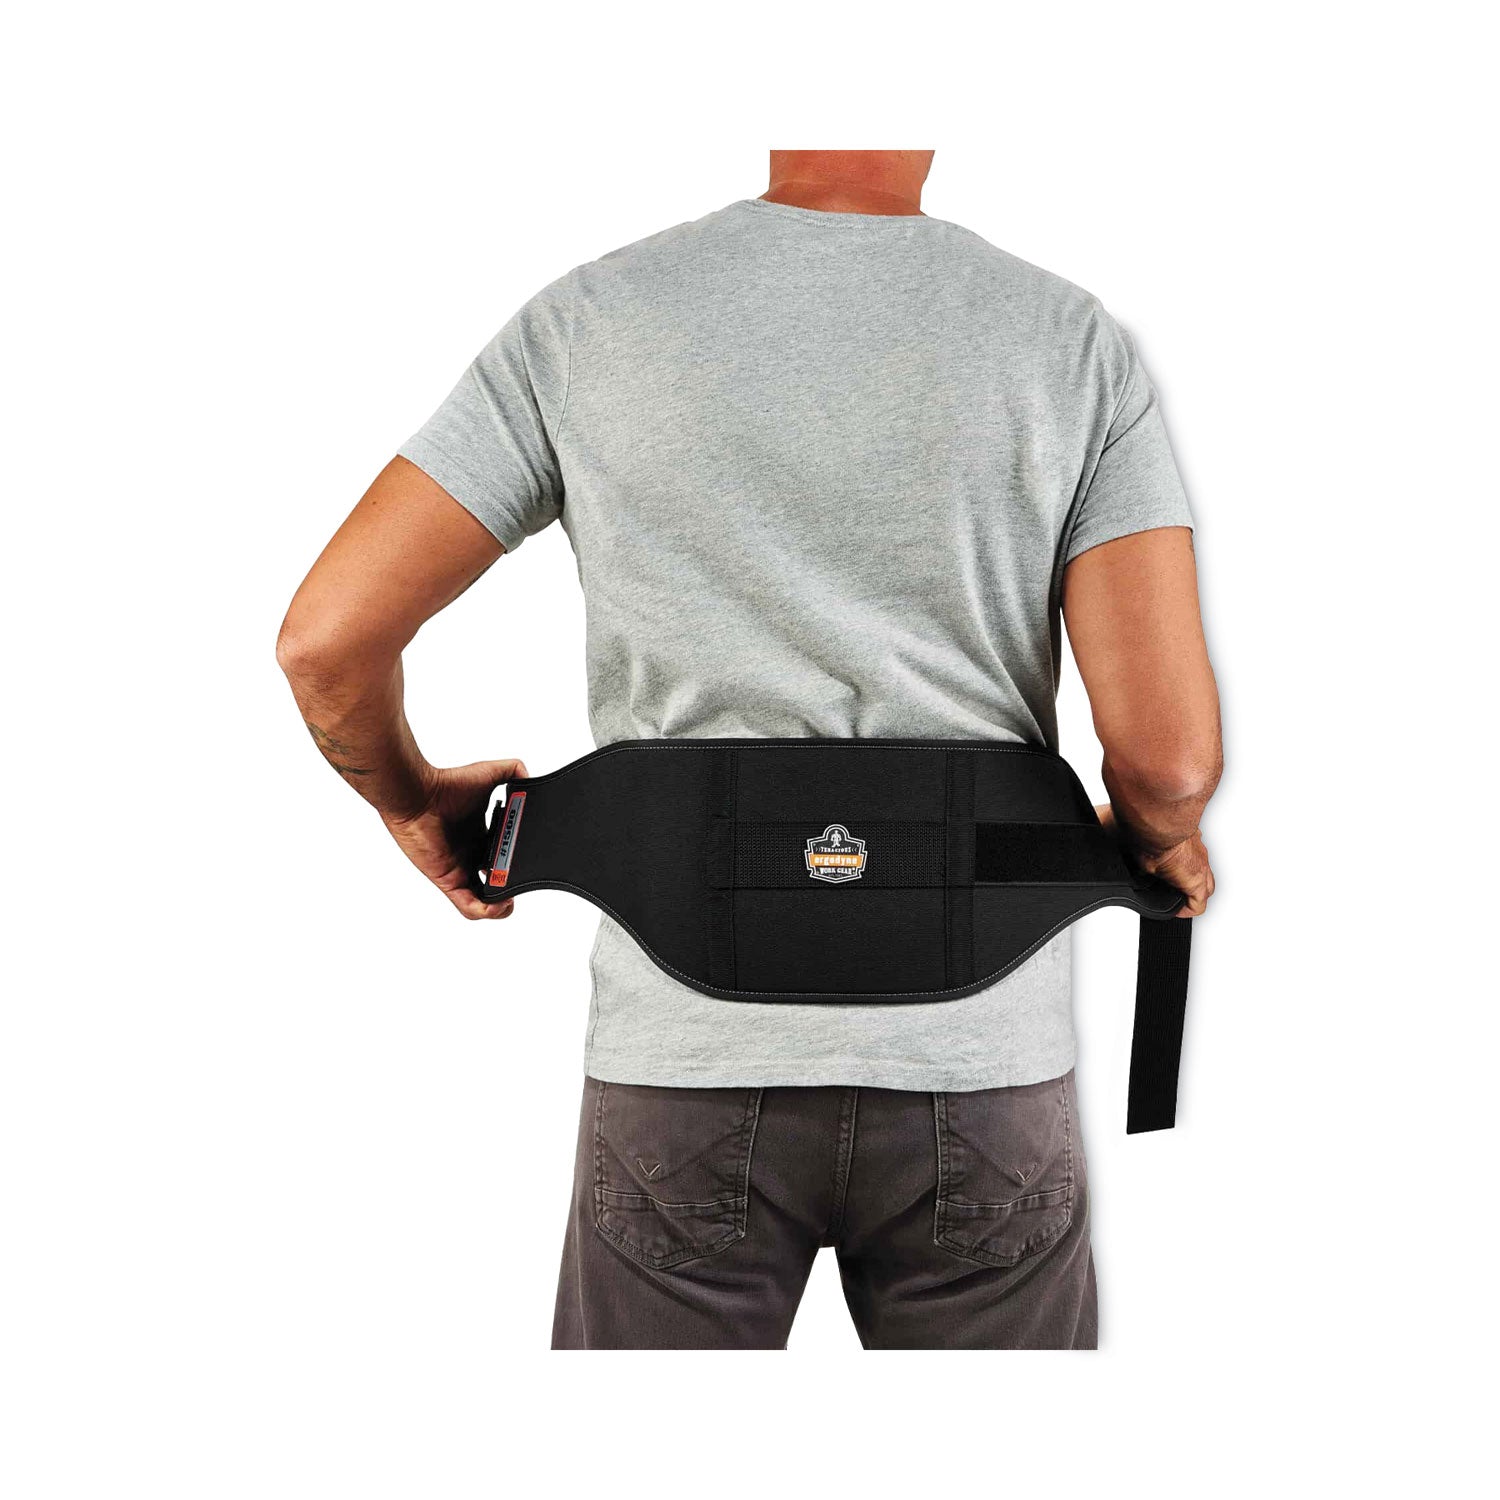 proflex-1500-weight-lifters-style-back-support-belt-x-large-38-to-42-waist-black-ships-in-1-3-business-days_ego11474 - 3